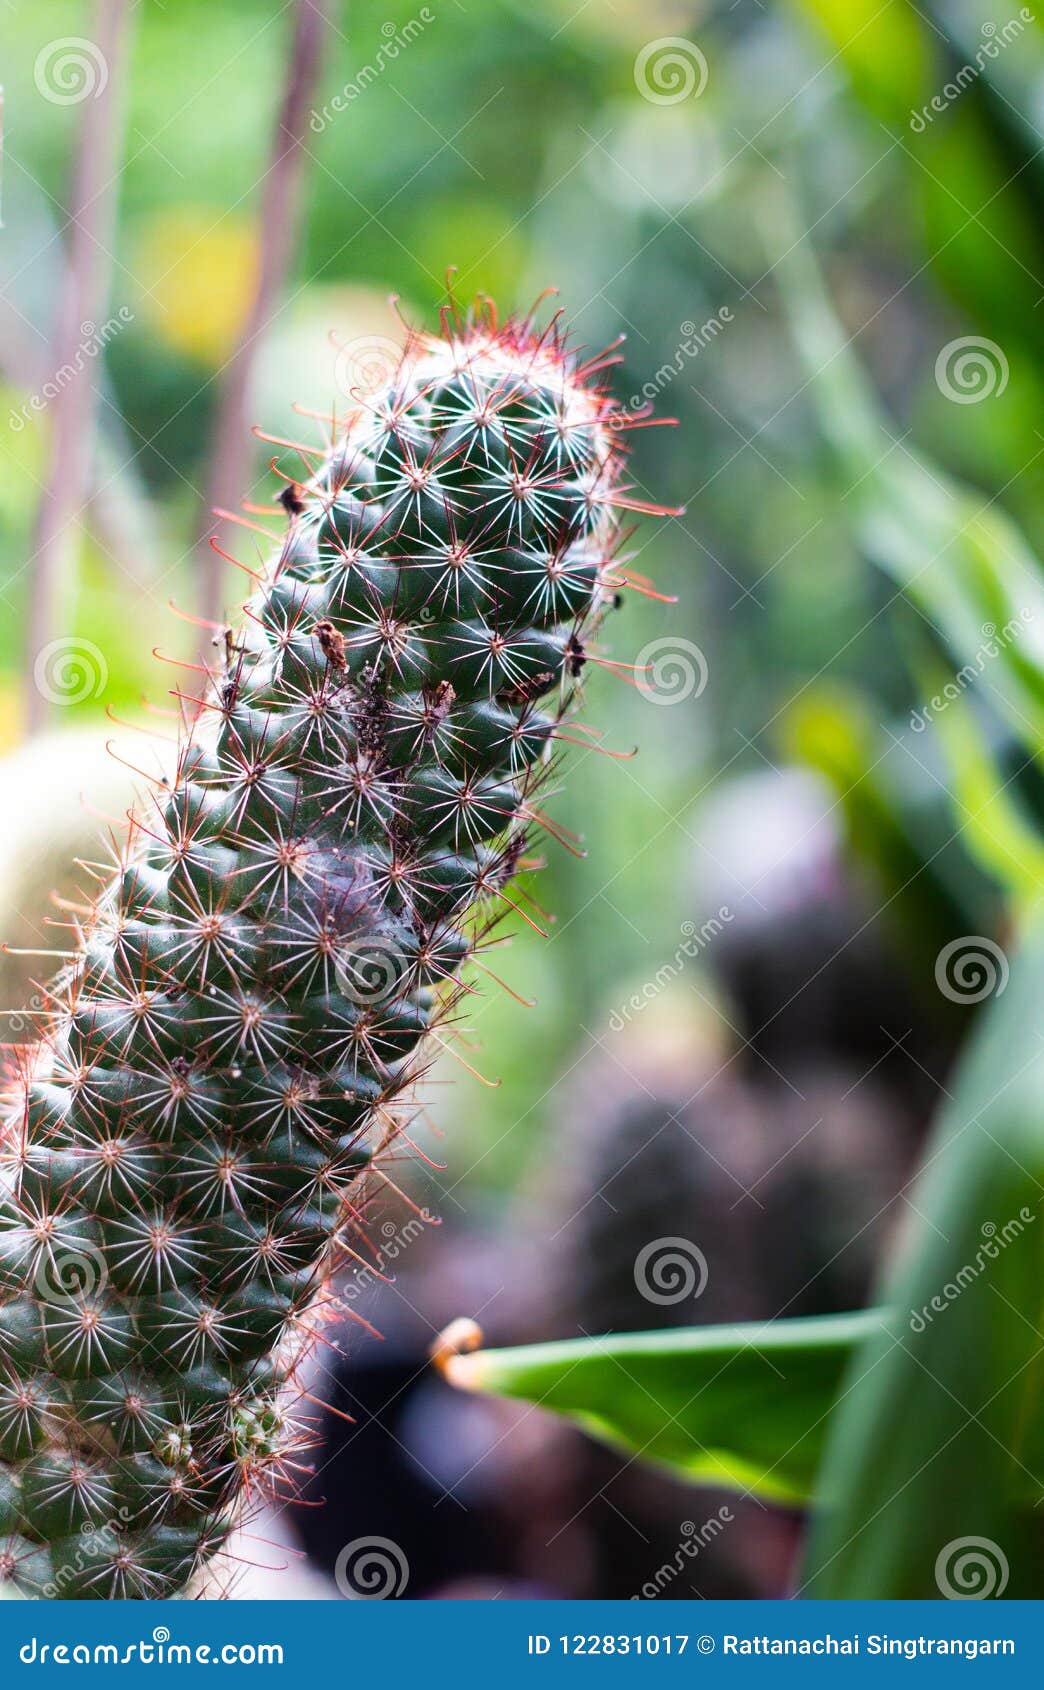 Saguaro Cactus Plant With Prickly Pears Green Color Of Thorn